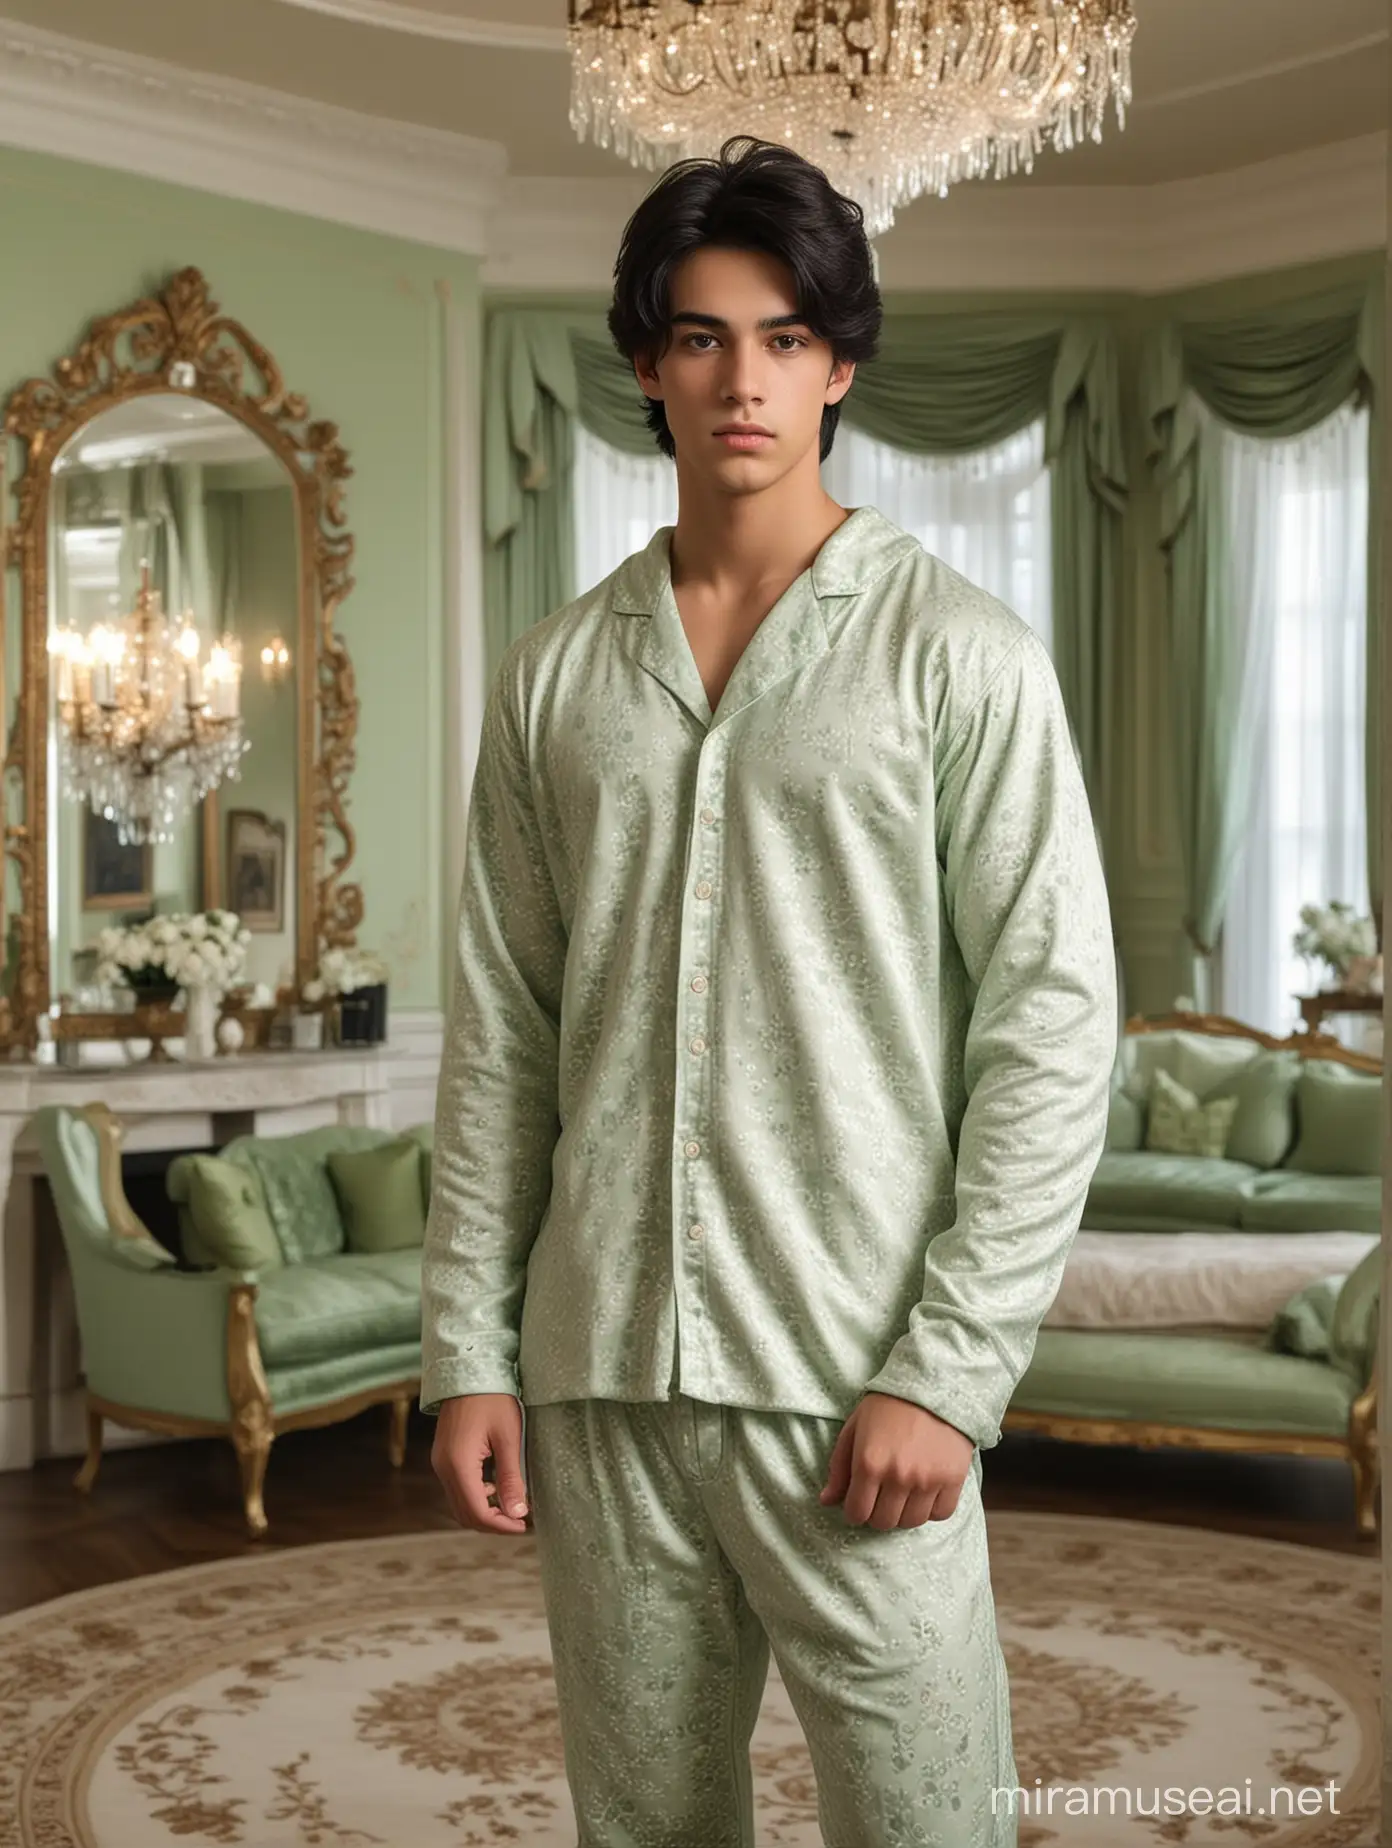 Focused Young Man in Luxurious SageColored Room